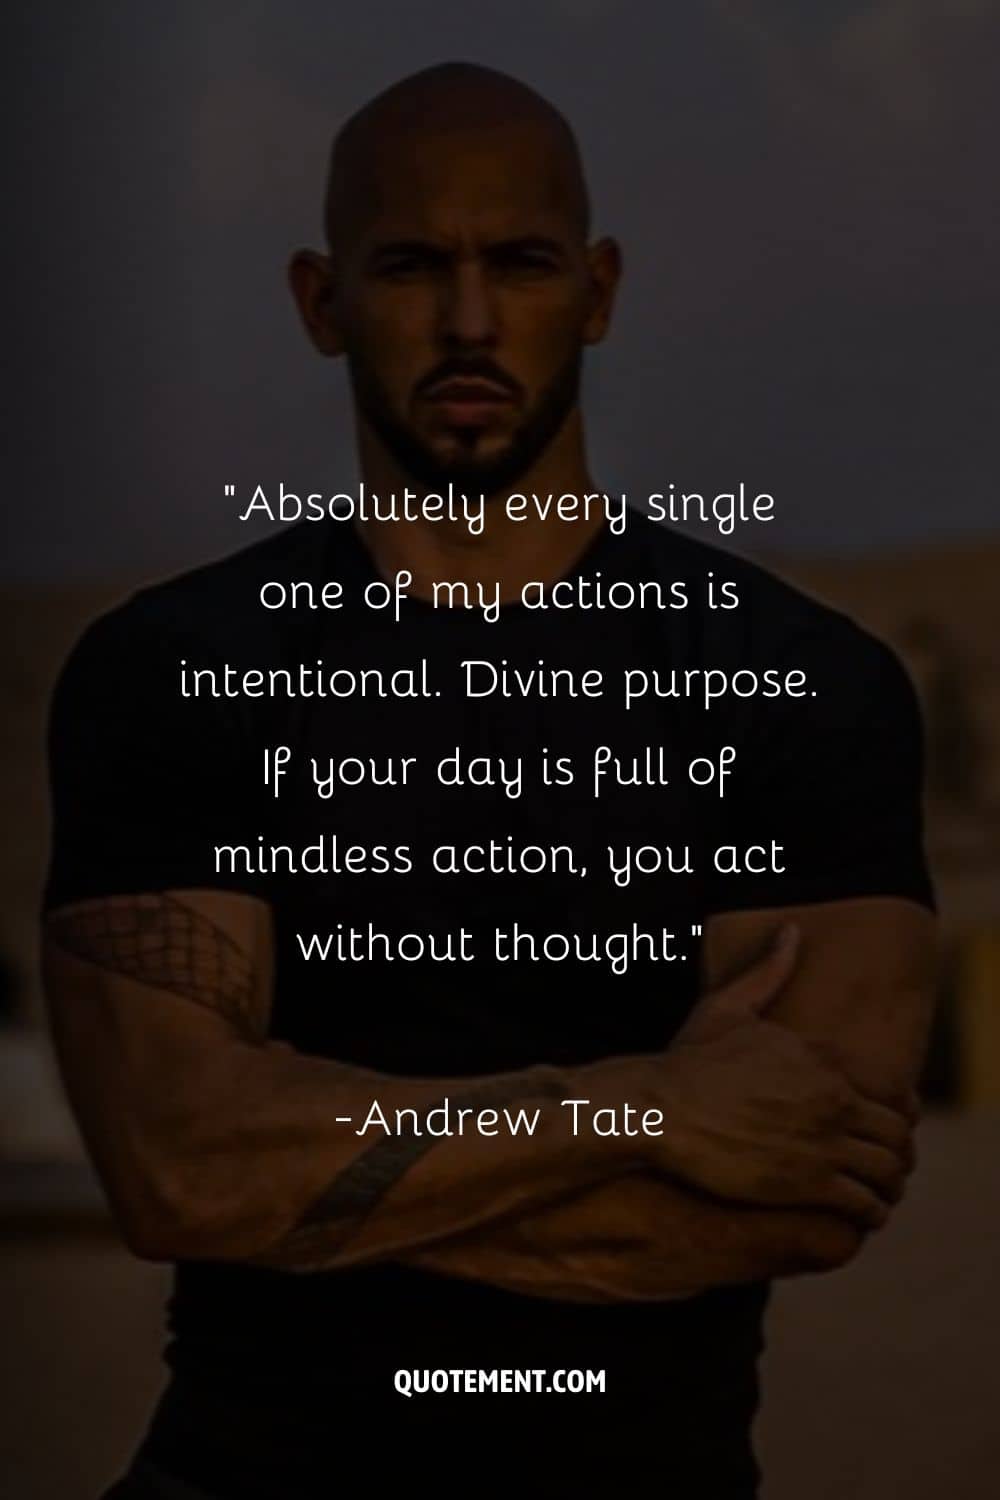 “Absolutely every single one of my actions is intentional. Divine purpose. If your day is full of mindless action, you act without thought.”